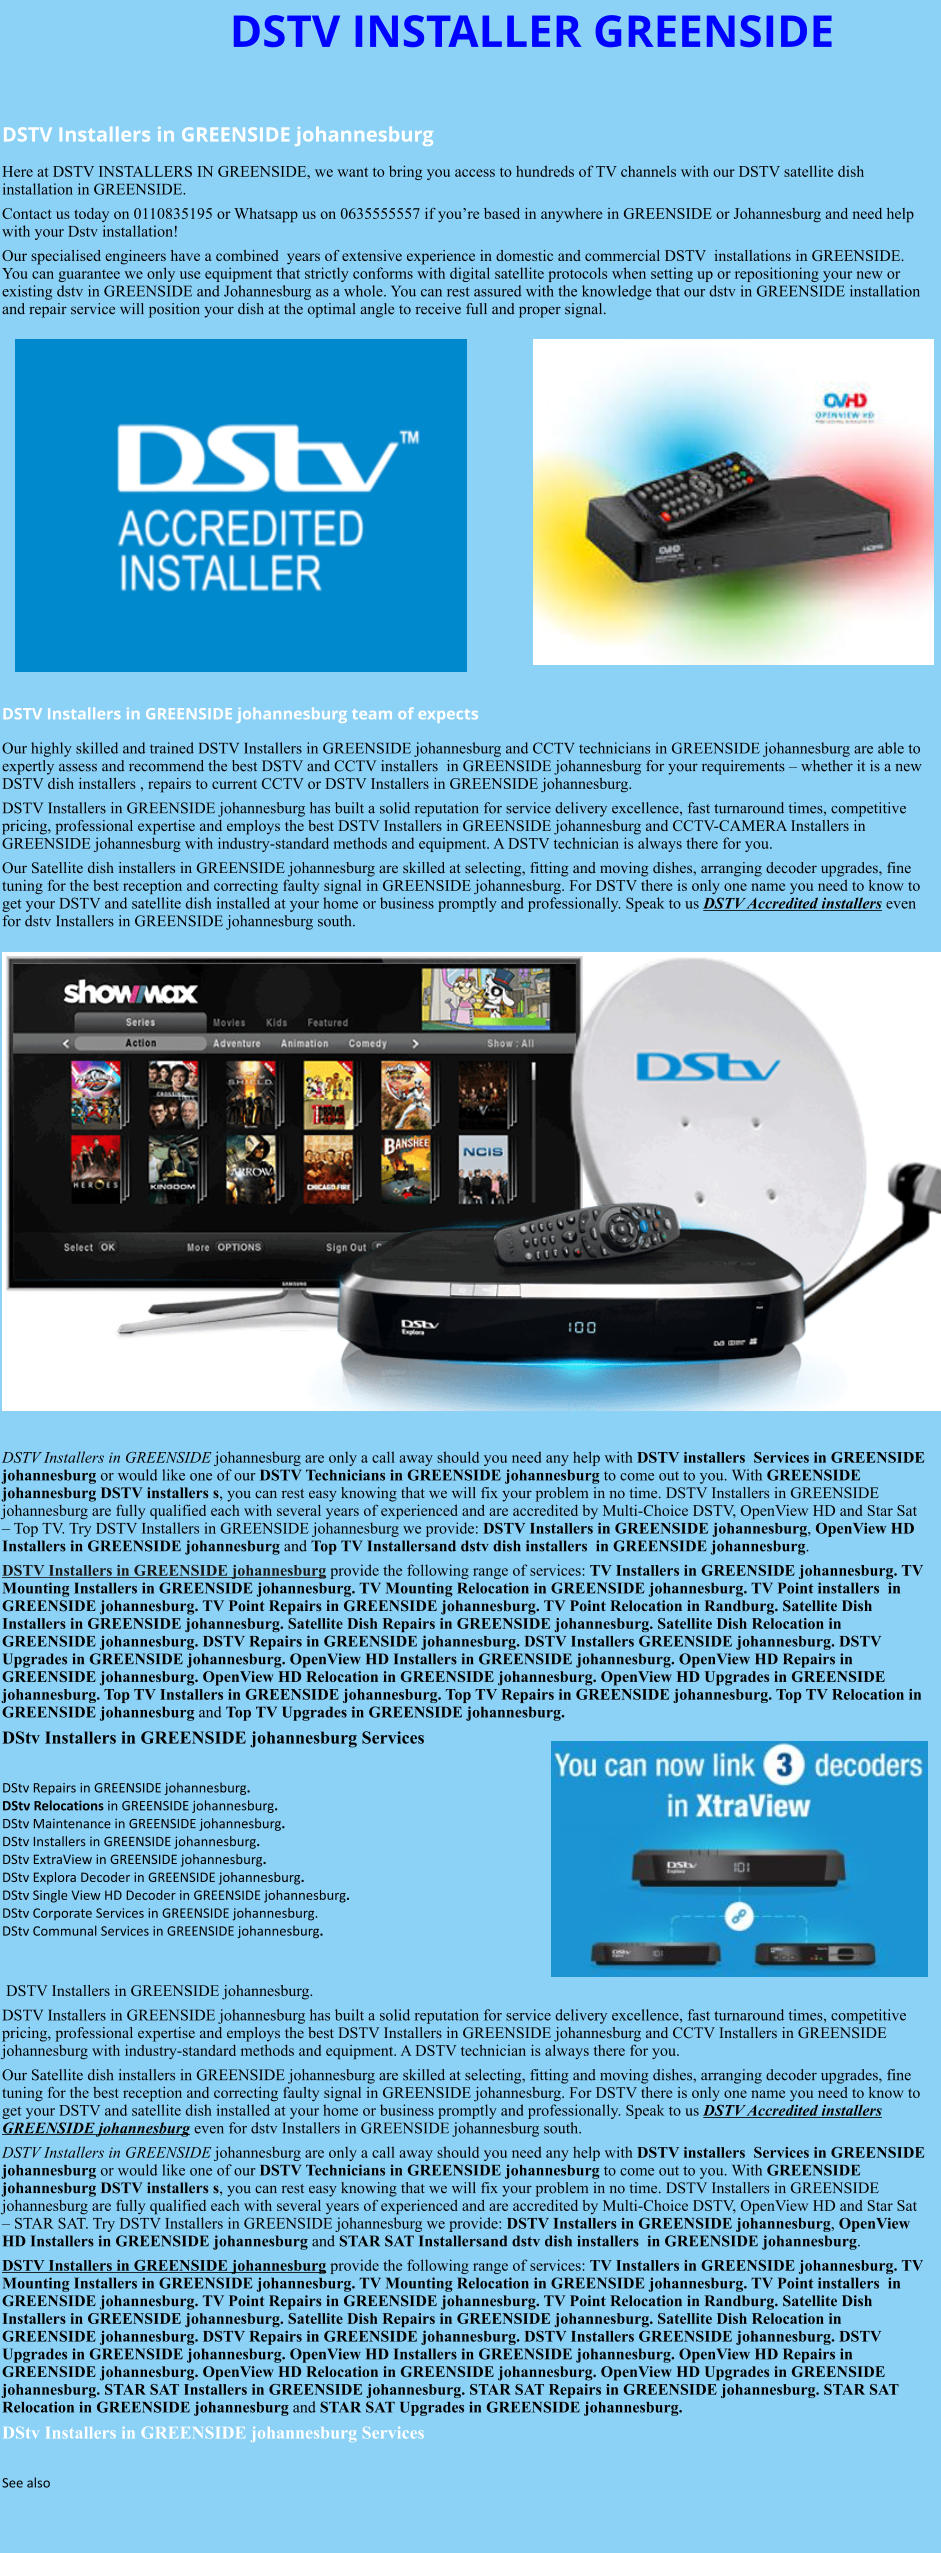 DSTV INSTALLER GREENSIDE  DSTV Installers in GREENSIDE johannesburg  Here at DSTV INSTALLERS IN GREENSIDE, we want to bring you access to hundreds of TV channels with our DSTV satellite dish installation in GREENSIDE. Contact us today on 0110835195 or Whatsapp us on 0635555557 if you’re based in anywhere in GREENSIDE or Johannesburg and need help with your Dstv installation! Our specialised engineers have a combined  years of extensive experience in domestic and commercial DSTV  installations in GREENSIDE. You can guarantee we only use equipment that strictly conforms with digital satellite protocols when setting up or repositioning your new or existing dstv in GREENSIDE and Johannesburg as a whole. You can rest assured with the knowledge that our dstv in GREENSIDE installation and repair service will position your dish at the optimal angle to receive full and proper signal.                DSTV Installers in GREENSIDE johannesburg team of expects Our highly skilled and trained DSTV Installers in GREENSIDE johannesburg and CCTV technicians in GREENSIDE johannesburg are able to expertly assess and recommend the best DSTV and CCTV installers  in GREENSIDE johannesburg for your requirements – whether it is a new DSTV dish installers , repairs to current CCTV or DSTV Installers in GREENSIDE johannesburg. DSTV Installers in GREENSIDE johannesburg has built a solid reputation for service delivery excellence, fast turnaround times, competitive pricing, professional expertise and employs the best DSTV Installers in GREENSIDE johannesburg and CCTV-CAMERA Installers in GREENSIDE johannesburg with industry-standard methods and equipment. A DSTV technician is always there for you. Our Satellite dish installers in GREENSIDE johannesburg are skilled at selecting, fitting and moving dishes, arranging decoder upgrades, fine tuning for the best reception and correcting faulty signal in GREENSIDE johannesburg. For DSTV there is only one name you need to know to get your DSTV and satellite dish installed at your home or business promptly and professionally. Speak to us DSTV Accredited installers even for dstv Installers in GREENSIDE johannesburg south.                      DSTV Installers in GREENSIDE johannesburg are only a call away should you need any help with DSTV installers  Services in GREENSIDE johannesburg or would like one of our DSTV Technicians in GREENSIDE johannesburg to come out to you. With GREENSIDE johannesburg DSTV installers s, you can rest easy knowing that we will fix your problem in no time. DSTV Installers in GREENSIDE johannesburg are fully qualified each with several years of experienced and are accredited by Multi-Choice DSTV, OpenView HD and Star Sat – Top TV. Try DSTV Installers in GREENSIDE johannesburg we provide: DSTV Installers in GREENSIDE johannesburg, OpenView HD Installers in GREENSIDE johannesburg and Top TV Installersand dstv dish installers  in GREENSIDE johannesburg. DSTV Installers in GREENSIDE johannesburg provide the following range of services: TV Installers in GREENSIDE johannesburg. TV Mounting Installers in GREENSIDE johannesburg. TV Mounting Relocation in GREENSIDE johannesburg. TV Point installers  in GREENSIDE johannesburg. TV Point Repairs in GREENSIDE johannesburg. TV Point Relocation in Randburg. Satellite Dish Installers in GREENSIDE johannesburg. Satellite Dish Repairs in GREENSIDE johannesburg. Satellite Dish Relocation in GREENSIDE johannesburg. DSTV Repairs in GREENSIDE johannesburg. DSTV Installers GREENSIDE johannesburg. DSTV Upgrades in GREENSIDE johannesburg. OpenView HD Installers in GREENSIDE johannesburg. OpenView HD Repairs in GREENSIDE johannesburg. OpenView HD Relocation in GREENSIDE johannesburg. OpenView HD Upgrades in GREENSIDE johannesburg. Top TV Installers in GREENSIDE johannesburg. Top TV Repairs in GREENSIDE johannesburg. Top TV Relocation in GREENSIDE johannesburg and Top TV Upgrades in GREENSIDE johannesburg. DStv Installers in GREENSIDE johannesburg Services  DStv Repairs in GREENSIDE johannesburg.  DStv Relocations in GREENSIDE johannesburg.  DStv Maintenance in GREENSIDE johannesburg. DStv Installers in GREENSIDE johannesburg. DStv ExtraView in GREENSIDE johannesburg. DStv Explora Decoder in GREENSIDE johannesburg. DStv Single View HD Decoder in GREENSIDE johannesburg. DStv Corporate Services in GREENSIDE johannesburg. DStv Communal Services in GREENSIDE johannesburg.    DSTV Installers in GREENSIDE johannesburg. DSTV Installers in GREENSIDE johannesburg has built a solid reputation for service delivery excellence, fast turnaround times, competitive pricing, professional expertise and employs the best DSTV Installers in GREENSIDE johannesburg and CCTV Installers in GREENSIDE johannesburg with industry-standard methods and equipment. A DSTV technician is always there for you. Our Satellite dish installers in GREENSIDE johannesburg are skilled at selecting, fitting and moving dishes, arranging decoder upgrades, fine tuning for the best reception and correcting faulty signal in GREENSIDE johannesburg. For DSTV there is only one name you need to know to get your DSTV and satellite dish installed at your home or business promptly and professionally. Speak to us DSTV Accredited installers GREENSIDE johannesburg even for dstv Installers in GREENSIDE johannesburg south. DSTV Installers in GREENSIDE johannesburg are only a call away should you need any help with DSTV installers  Services in GREENSIDE johannesburg or would like one of our DSTV Technicians in GREENSIDE johannesburg to come out to you. With GREENSIDE johannesburg DSTV installers s, you can rest easy knowing that we will fix your problem in no time. DSTV Installers in GREENSIDE johannesburg are fully qualified each with several years of experienced and are accredited by Multi-Choice DSTV, OpenView HD and Star Sat – STAR SAT. Try DSTV Installers in GREENSIDE johannesburg we provide: DSTV Installers in GREENSIDE johannesburg, OpenView HD Installers in GREENSIDE johannesburg and STAR SAT Installersand dstv dish installers  in GREENSIDE johannesburg. DSTV Installers in GREENSIDE johannesburg provide the following range of services: TV Installers in GREENSIDE johannesburg. TV Mounting Installers in GREENSIDE johannesburg. TV Mounting Relocation in GREENSIDE johannesburg. TV Point installers  in GREENSIDE johannesburg. TV Point Repairs in GREENSIDE johannesburg. TV Point Relocation in Randburg. Satellite Dish Installers in GREENSIDE johannesburg. Satellite Dish Repairs in GREENSIDE johannesburg. Satellite Dish Relocation in GREENSIDE johannesburg. DSTV Repairs in GREENSIDE johannesburg. DSTV Installers GREENSIDE johannesburg. DSTV Upgrades in GREENSIDE johannesburg. OpenView HD Installers in GREENSIDE johannesburg. OpenView HD Repairs in GREENSIDE johannesburg. OpenView HD Relocation in GREENSIDE johannesburg. OpenView HD Upgrades in GREENSIDE johannesburg. STAR SAT Installers in GREENSIDE johannesburg. STAR SAT Repairs in GREENSIDE johannesburg. STAR SAT Relocation in GREENSIDE johannesburg and STAR SAT Upgrades in GREENSIDE johannesburg. DStv Installers in GREENSIDE johannesburg Services  See also